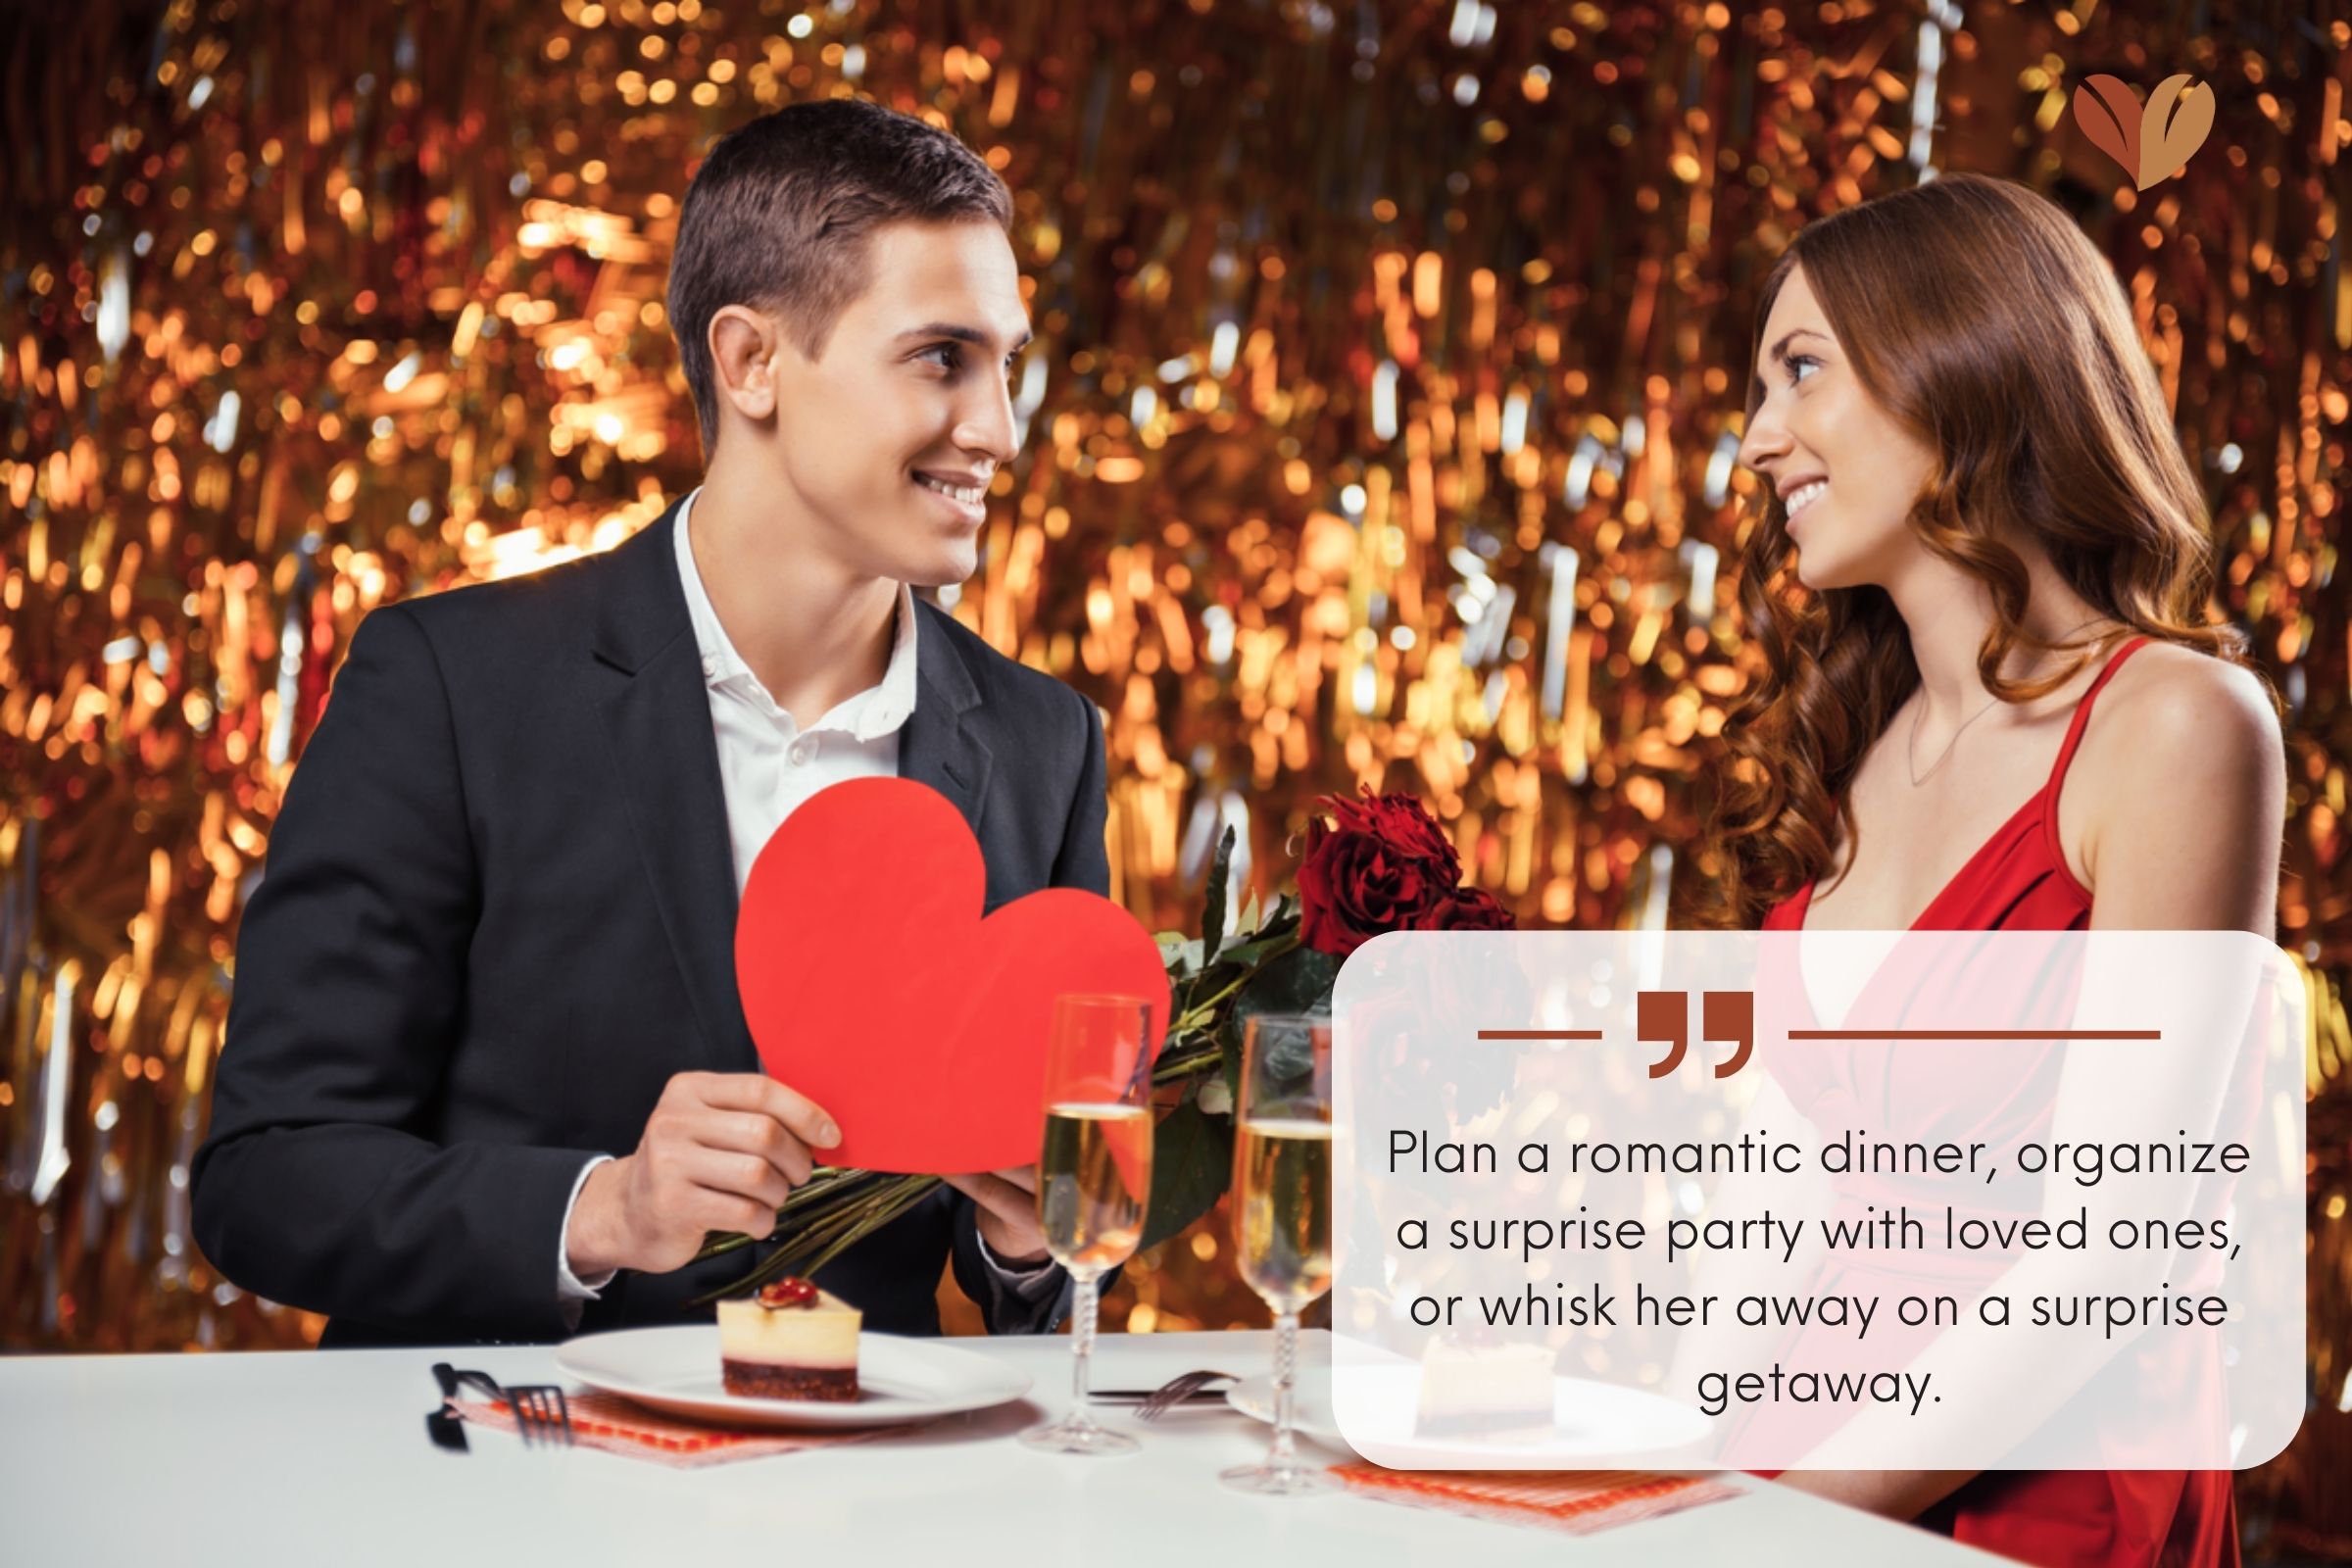 Plan a romantic dinner as an anniversary gifts for wife 